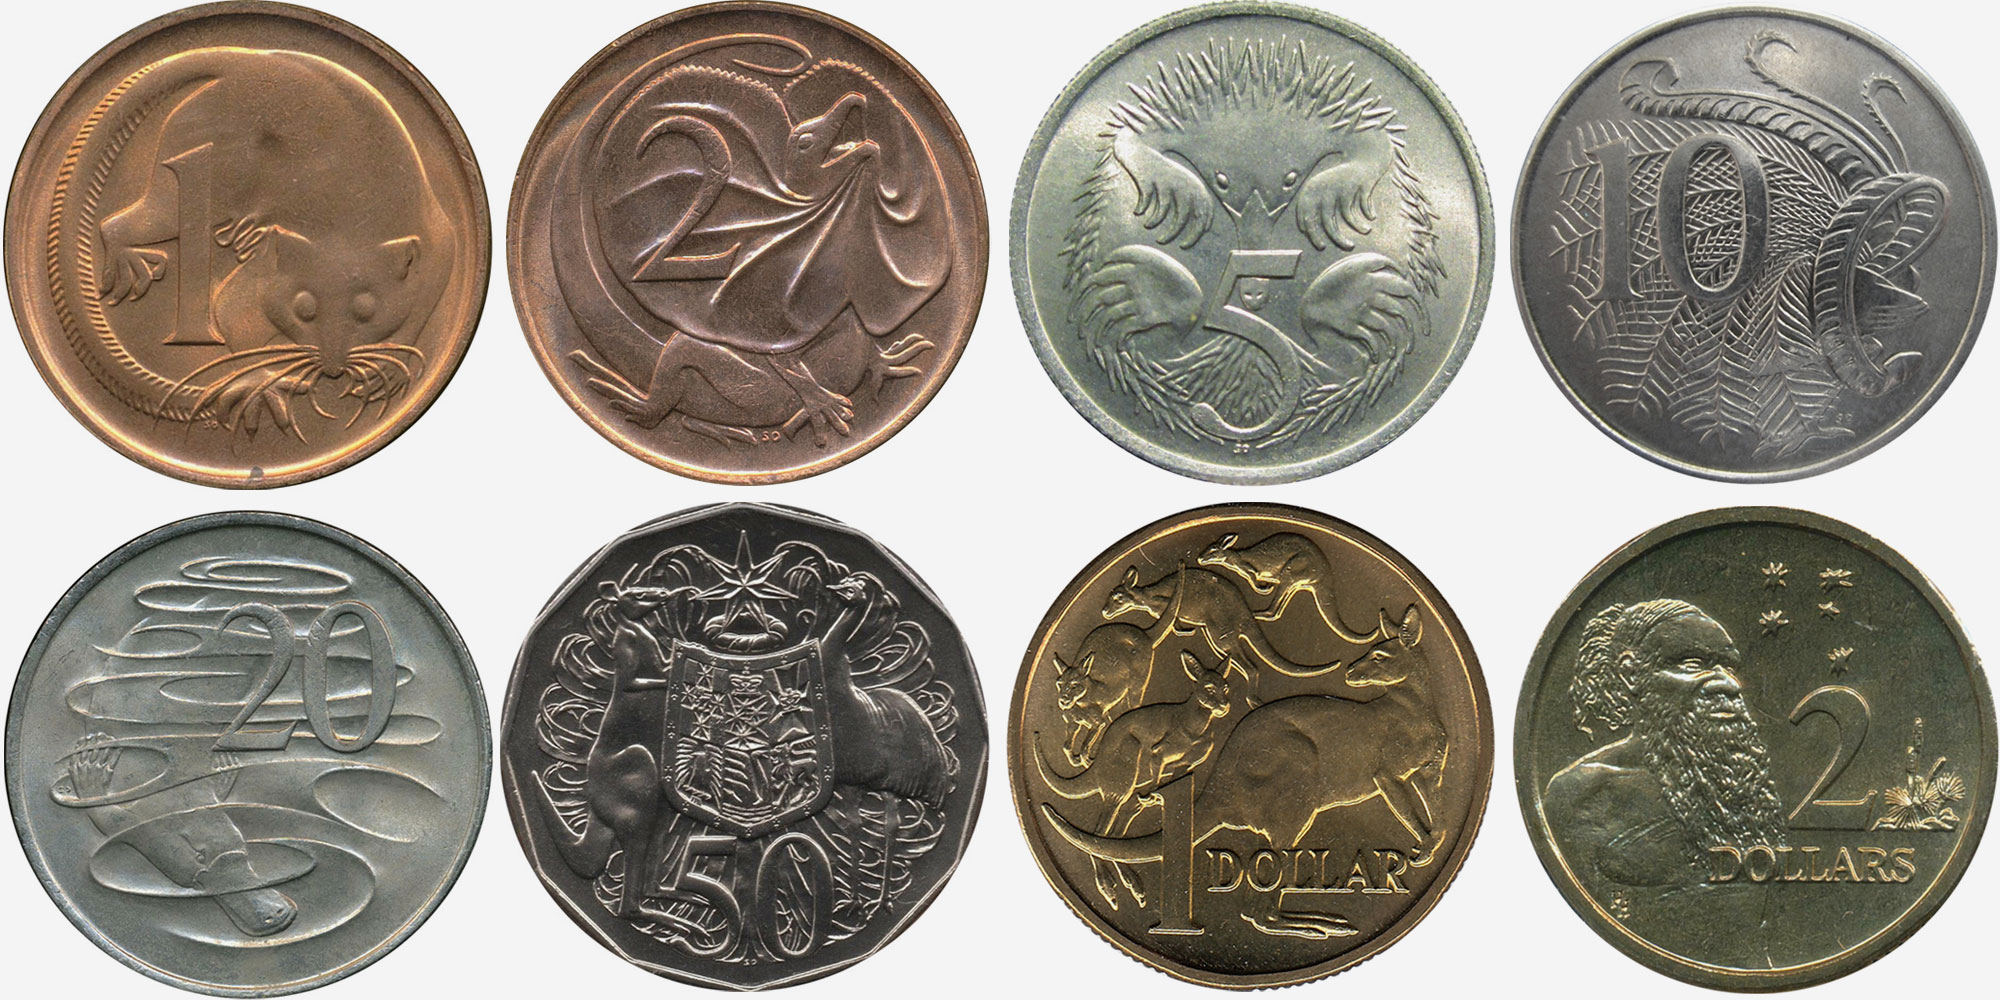 Coins from Australian in circulation